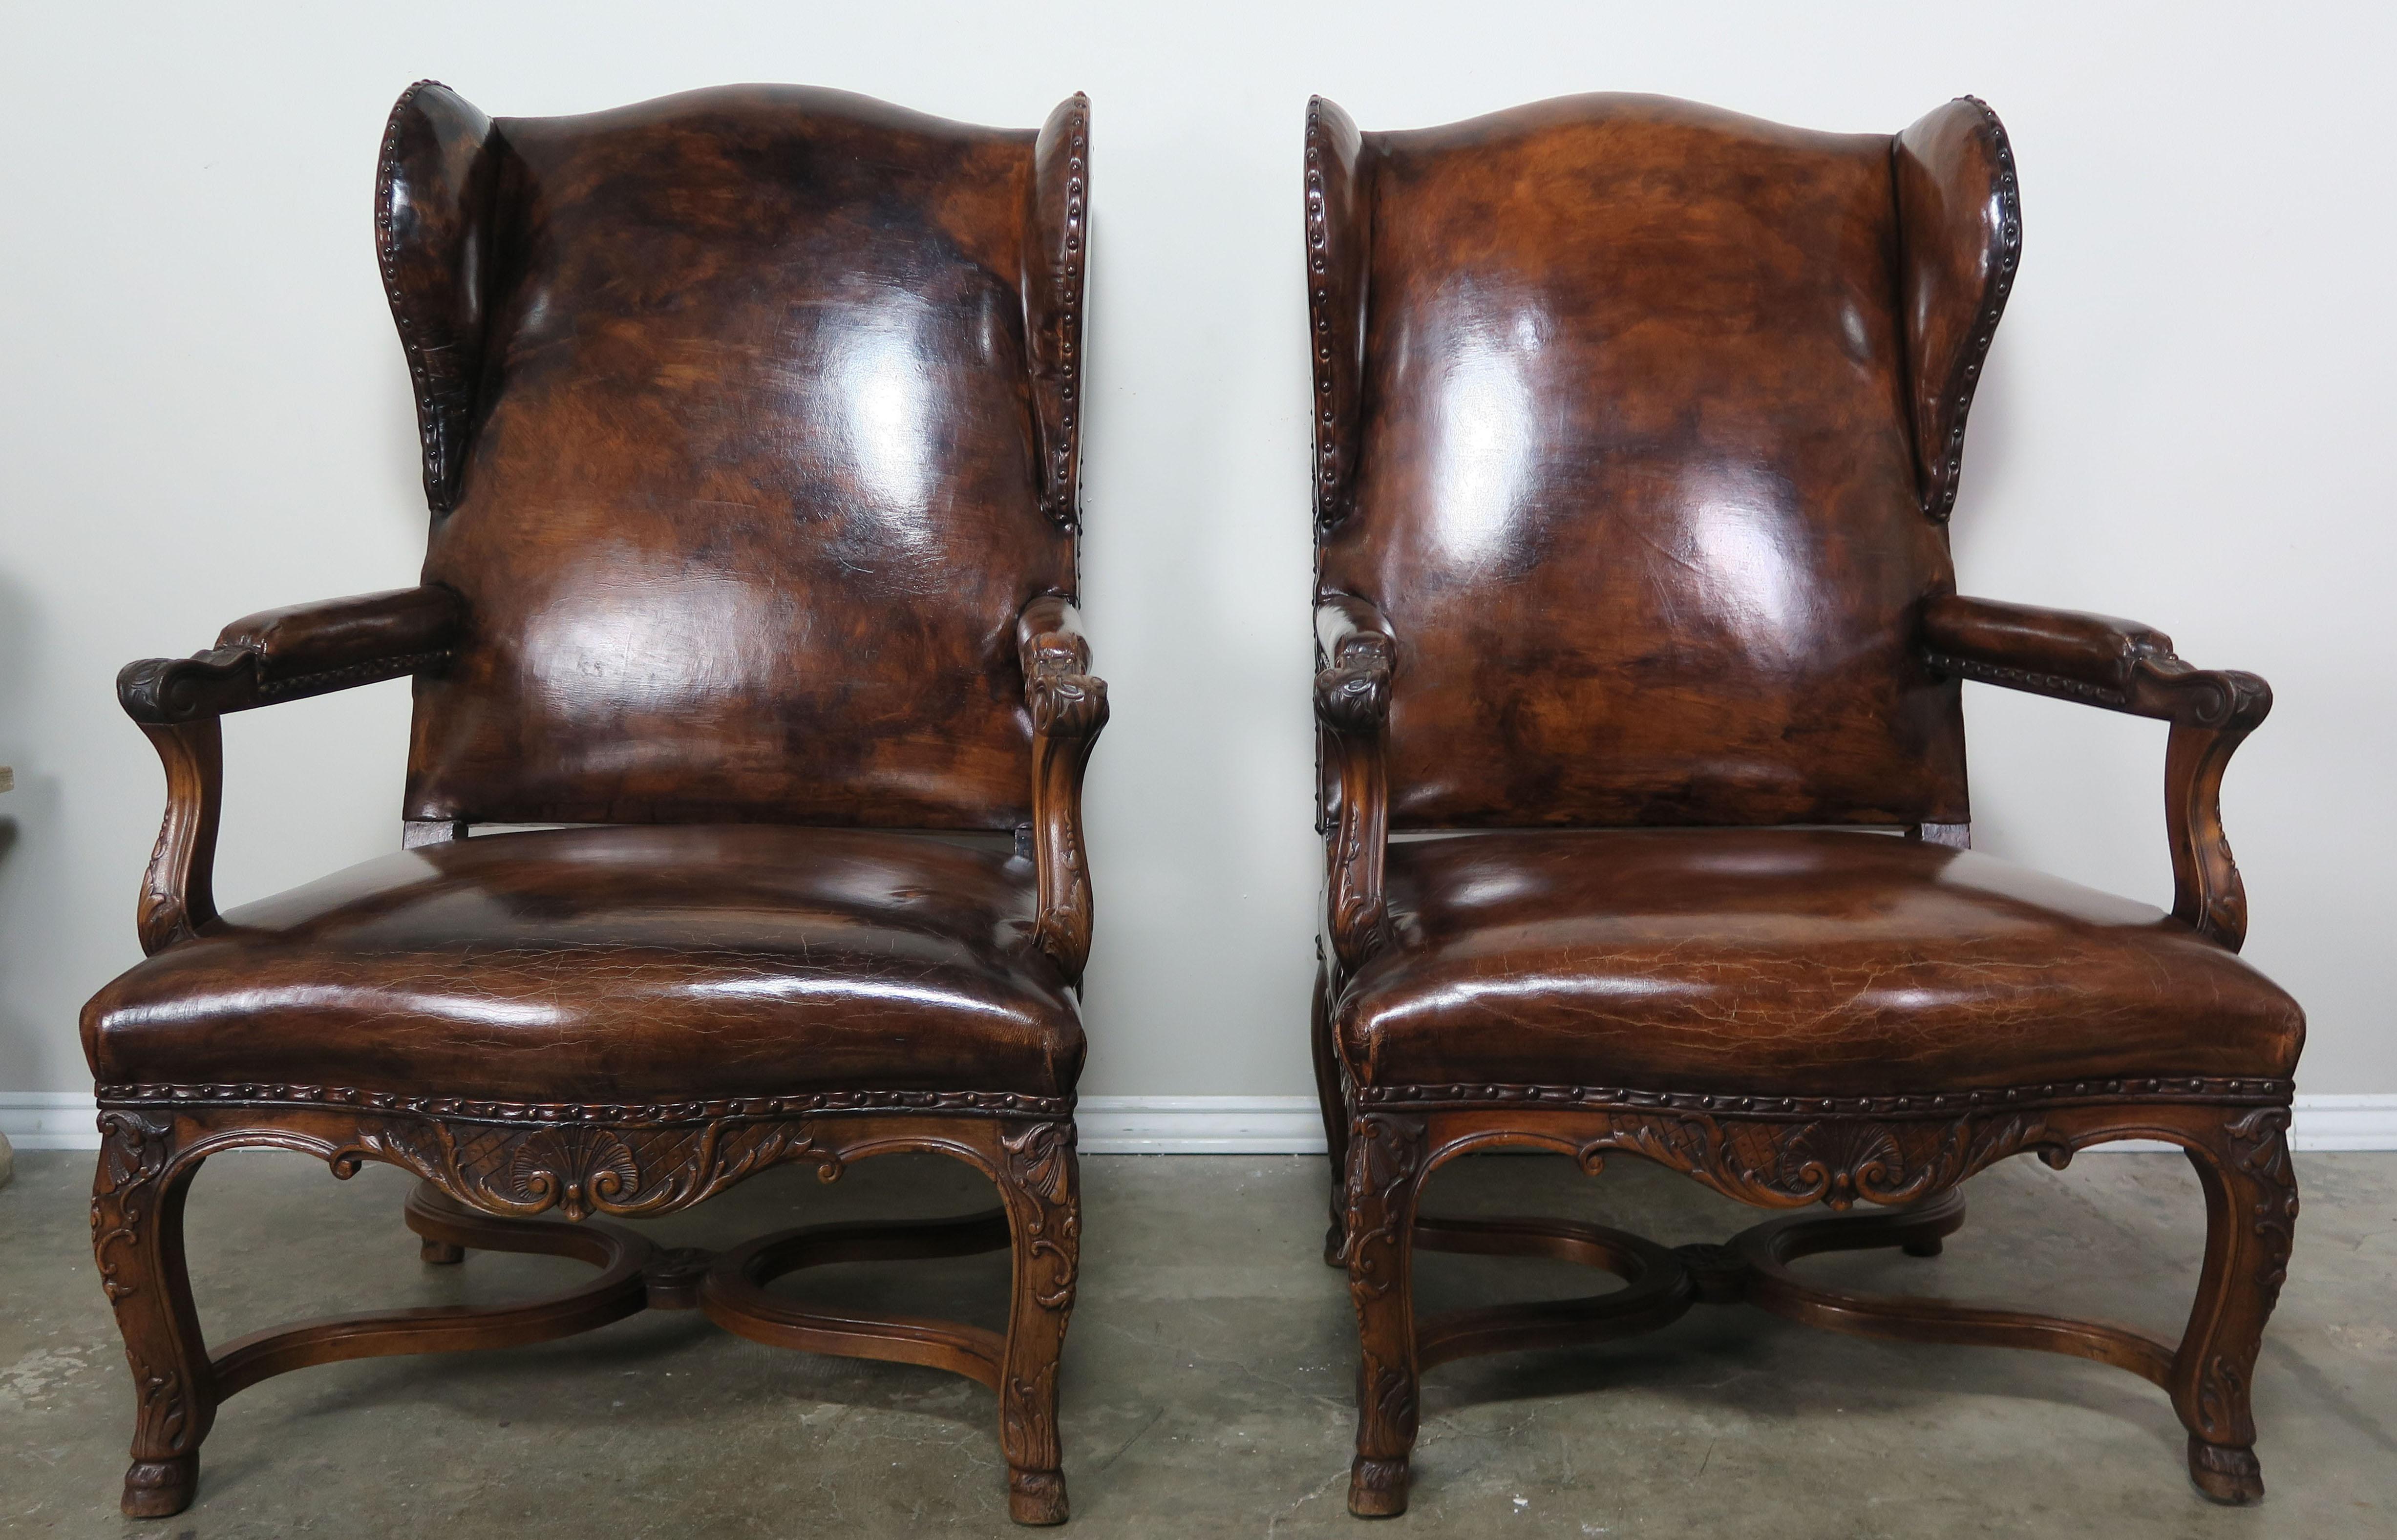 Pair of handsome Regency style rich leather upholstered French wing-back armchairs with nailhead trim over flat welt detail. The chairs stand on four cabriole legs that meet at centre 